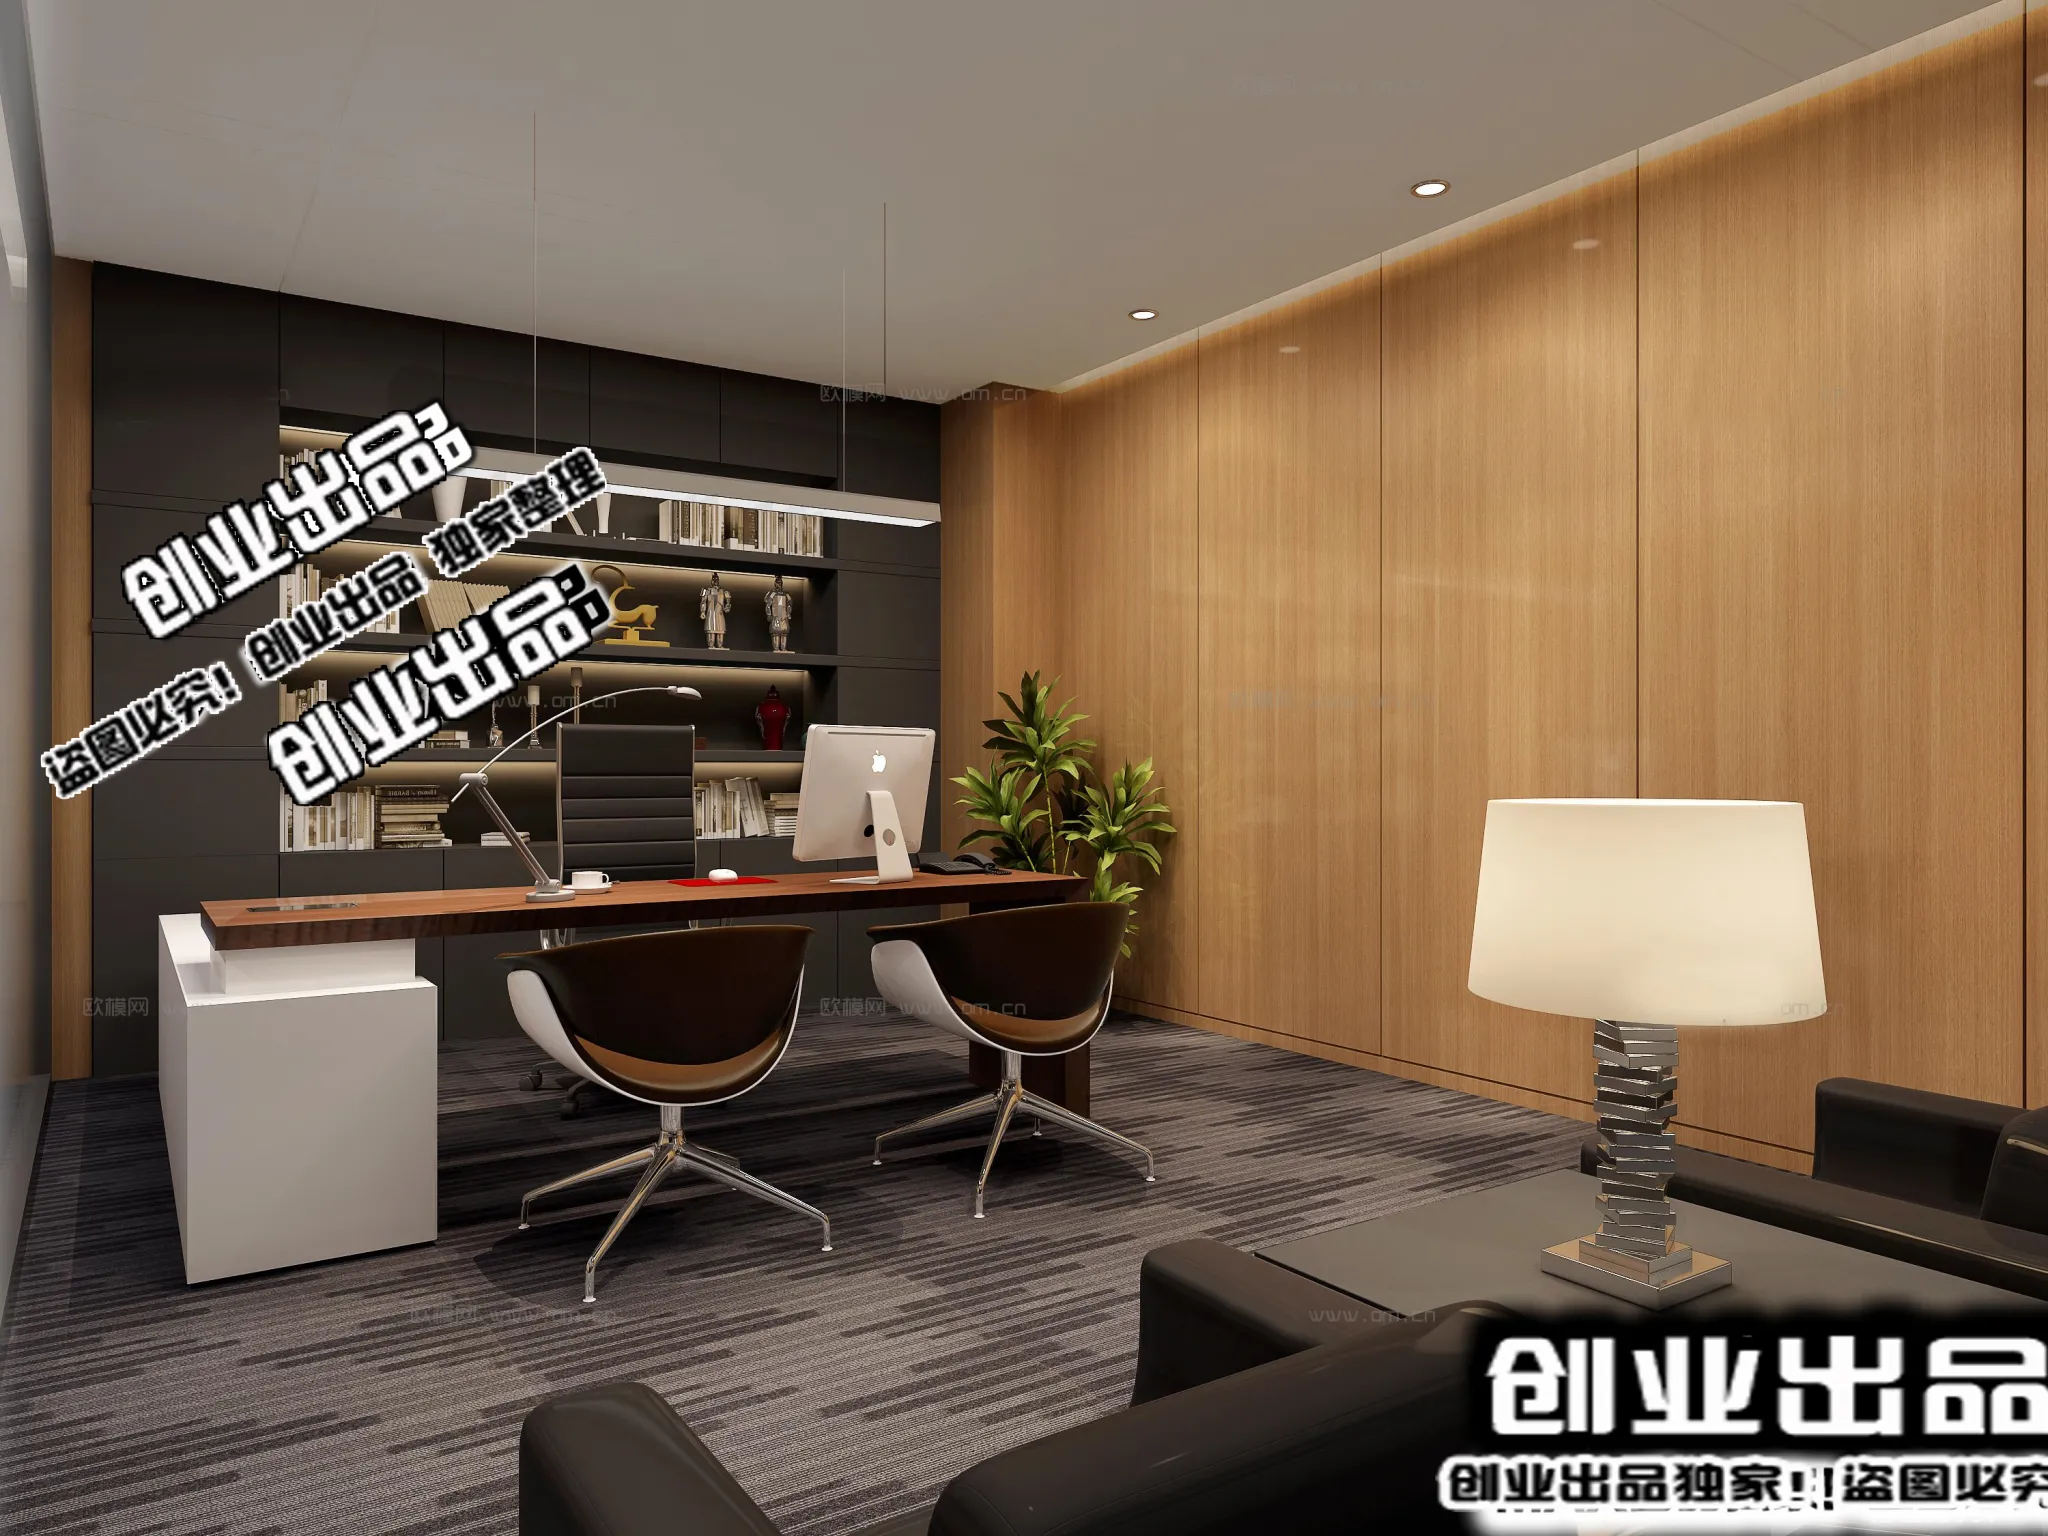 3D OFFICE INTERIOR (VRAY) – MANAGER ROOM 3D SCENES – 135